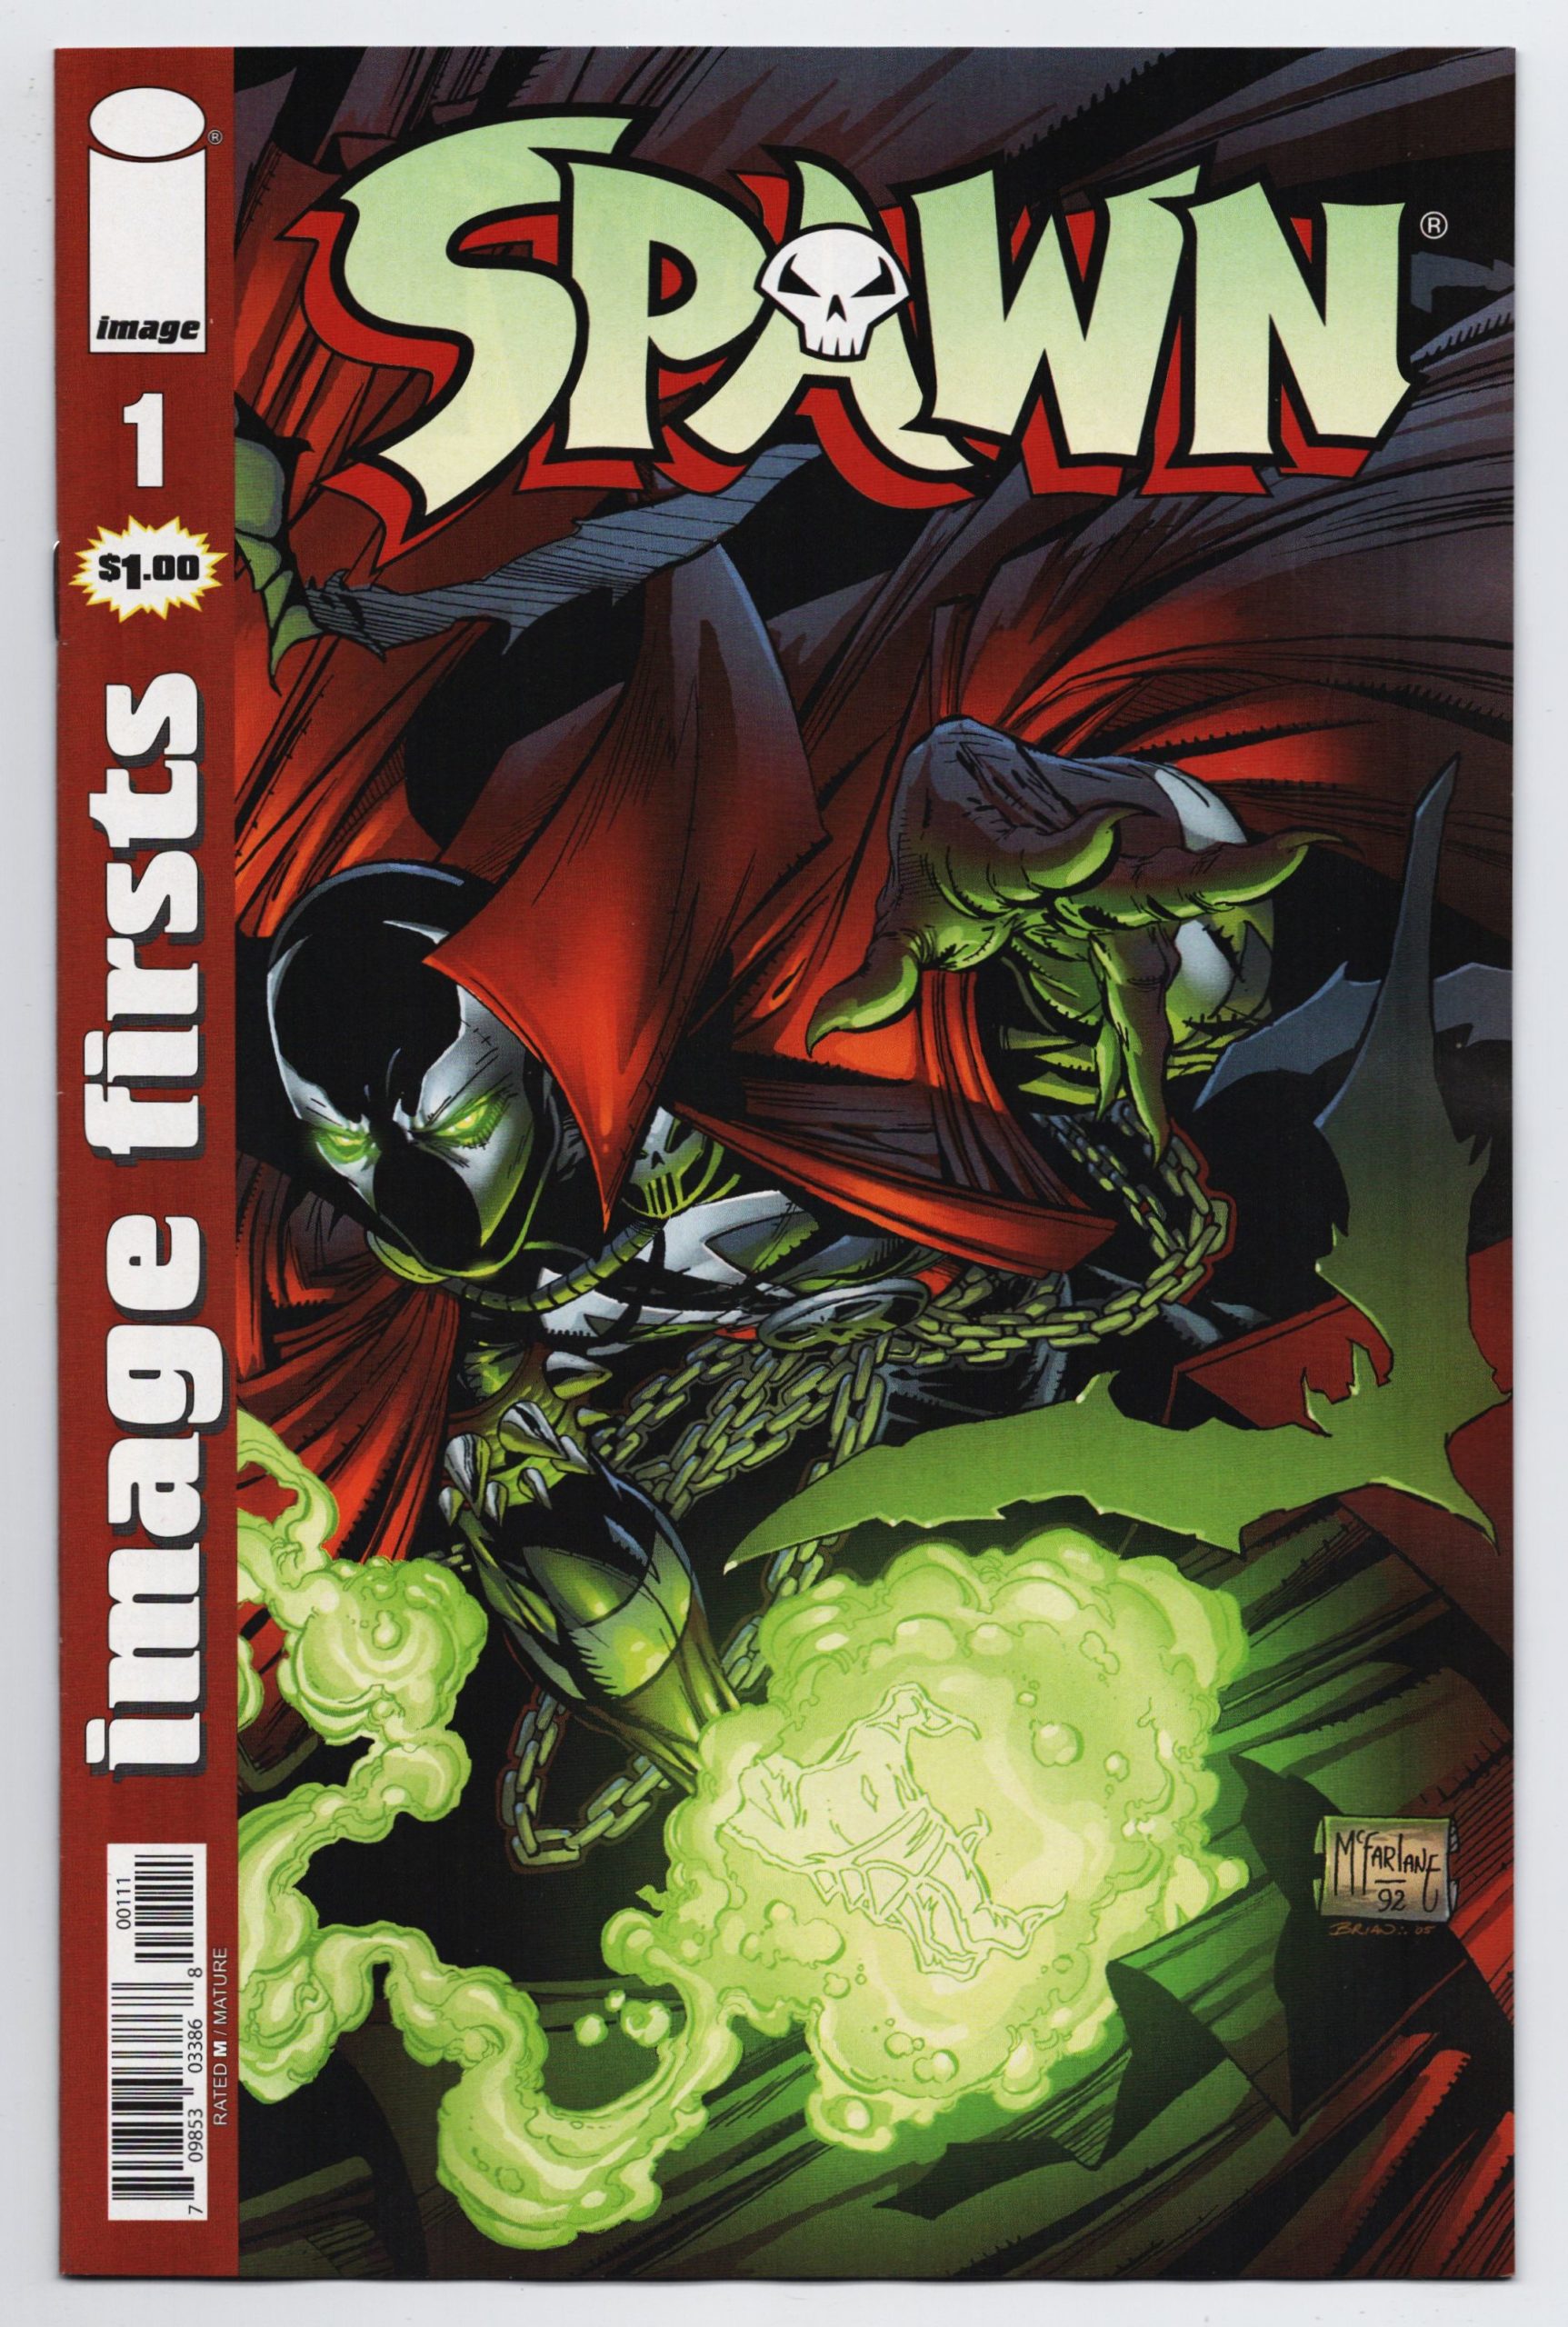 VF/NM Spawn #74-1st print 300 copies available!